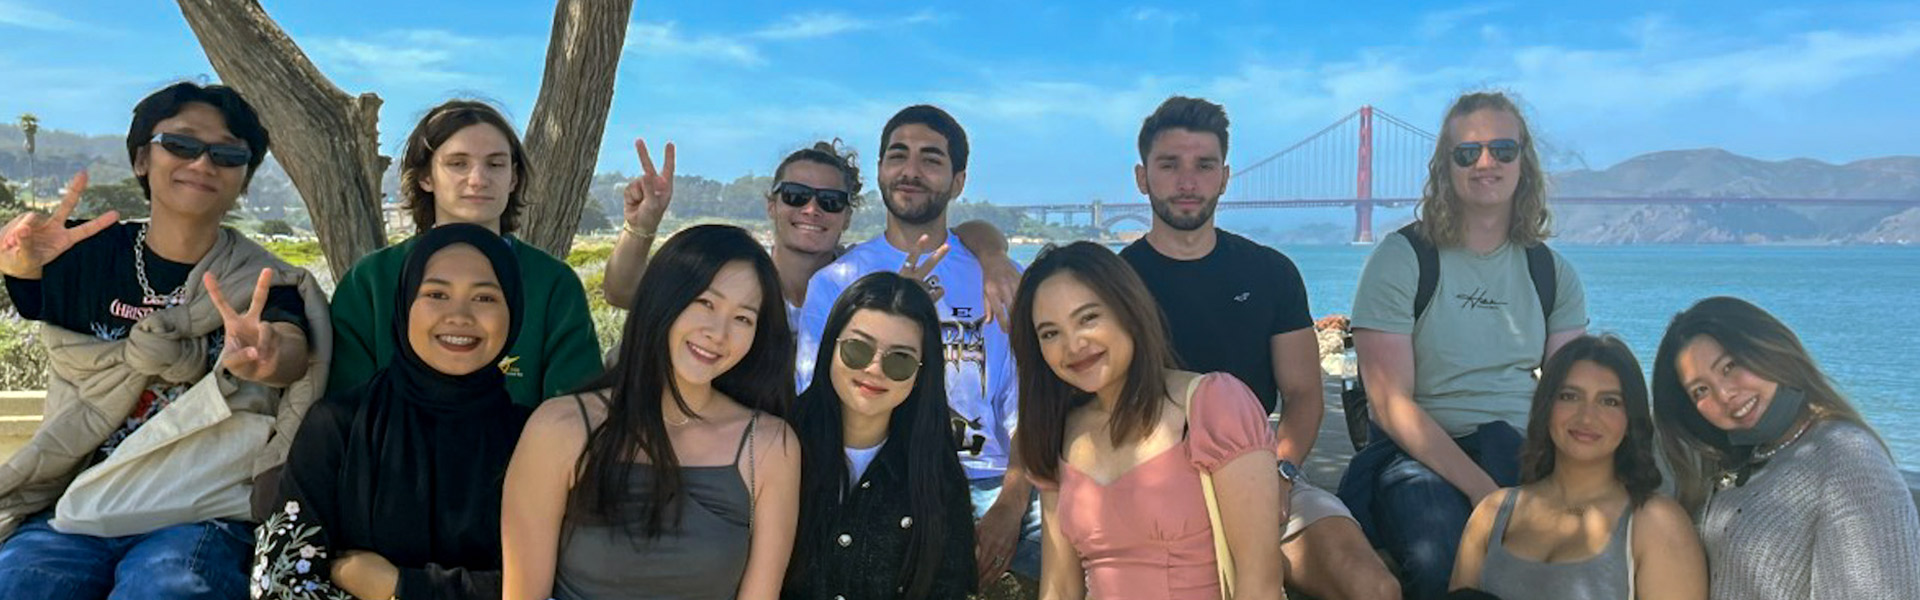 Group of international students pose with the Golden Gate Bridge in the background